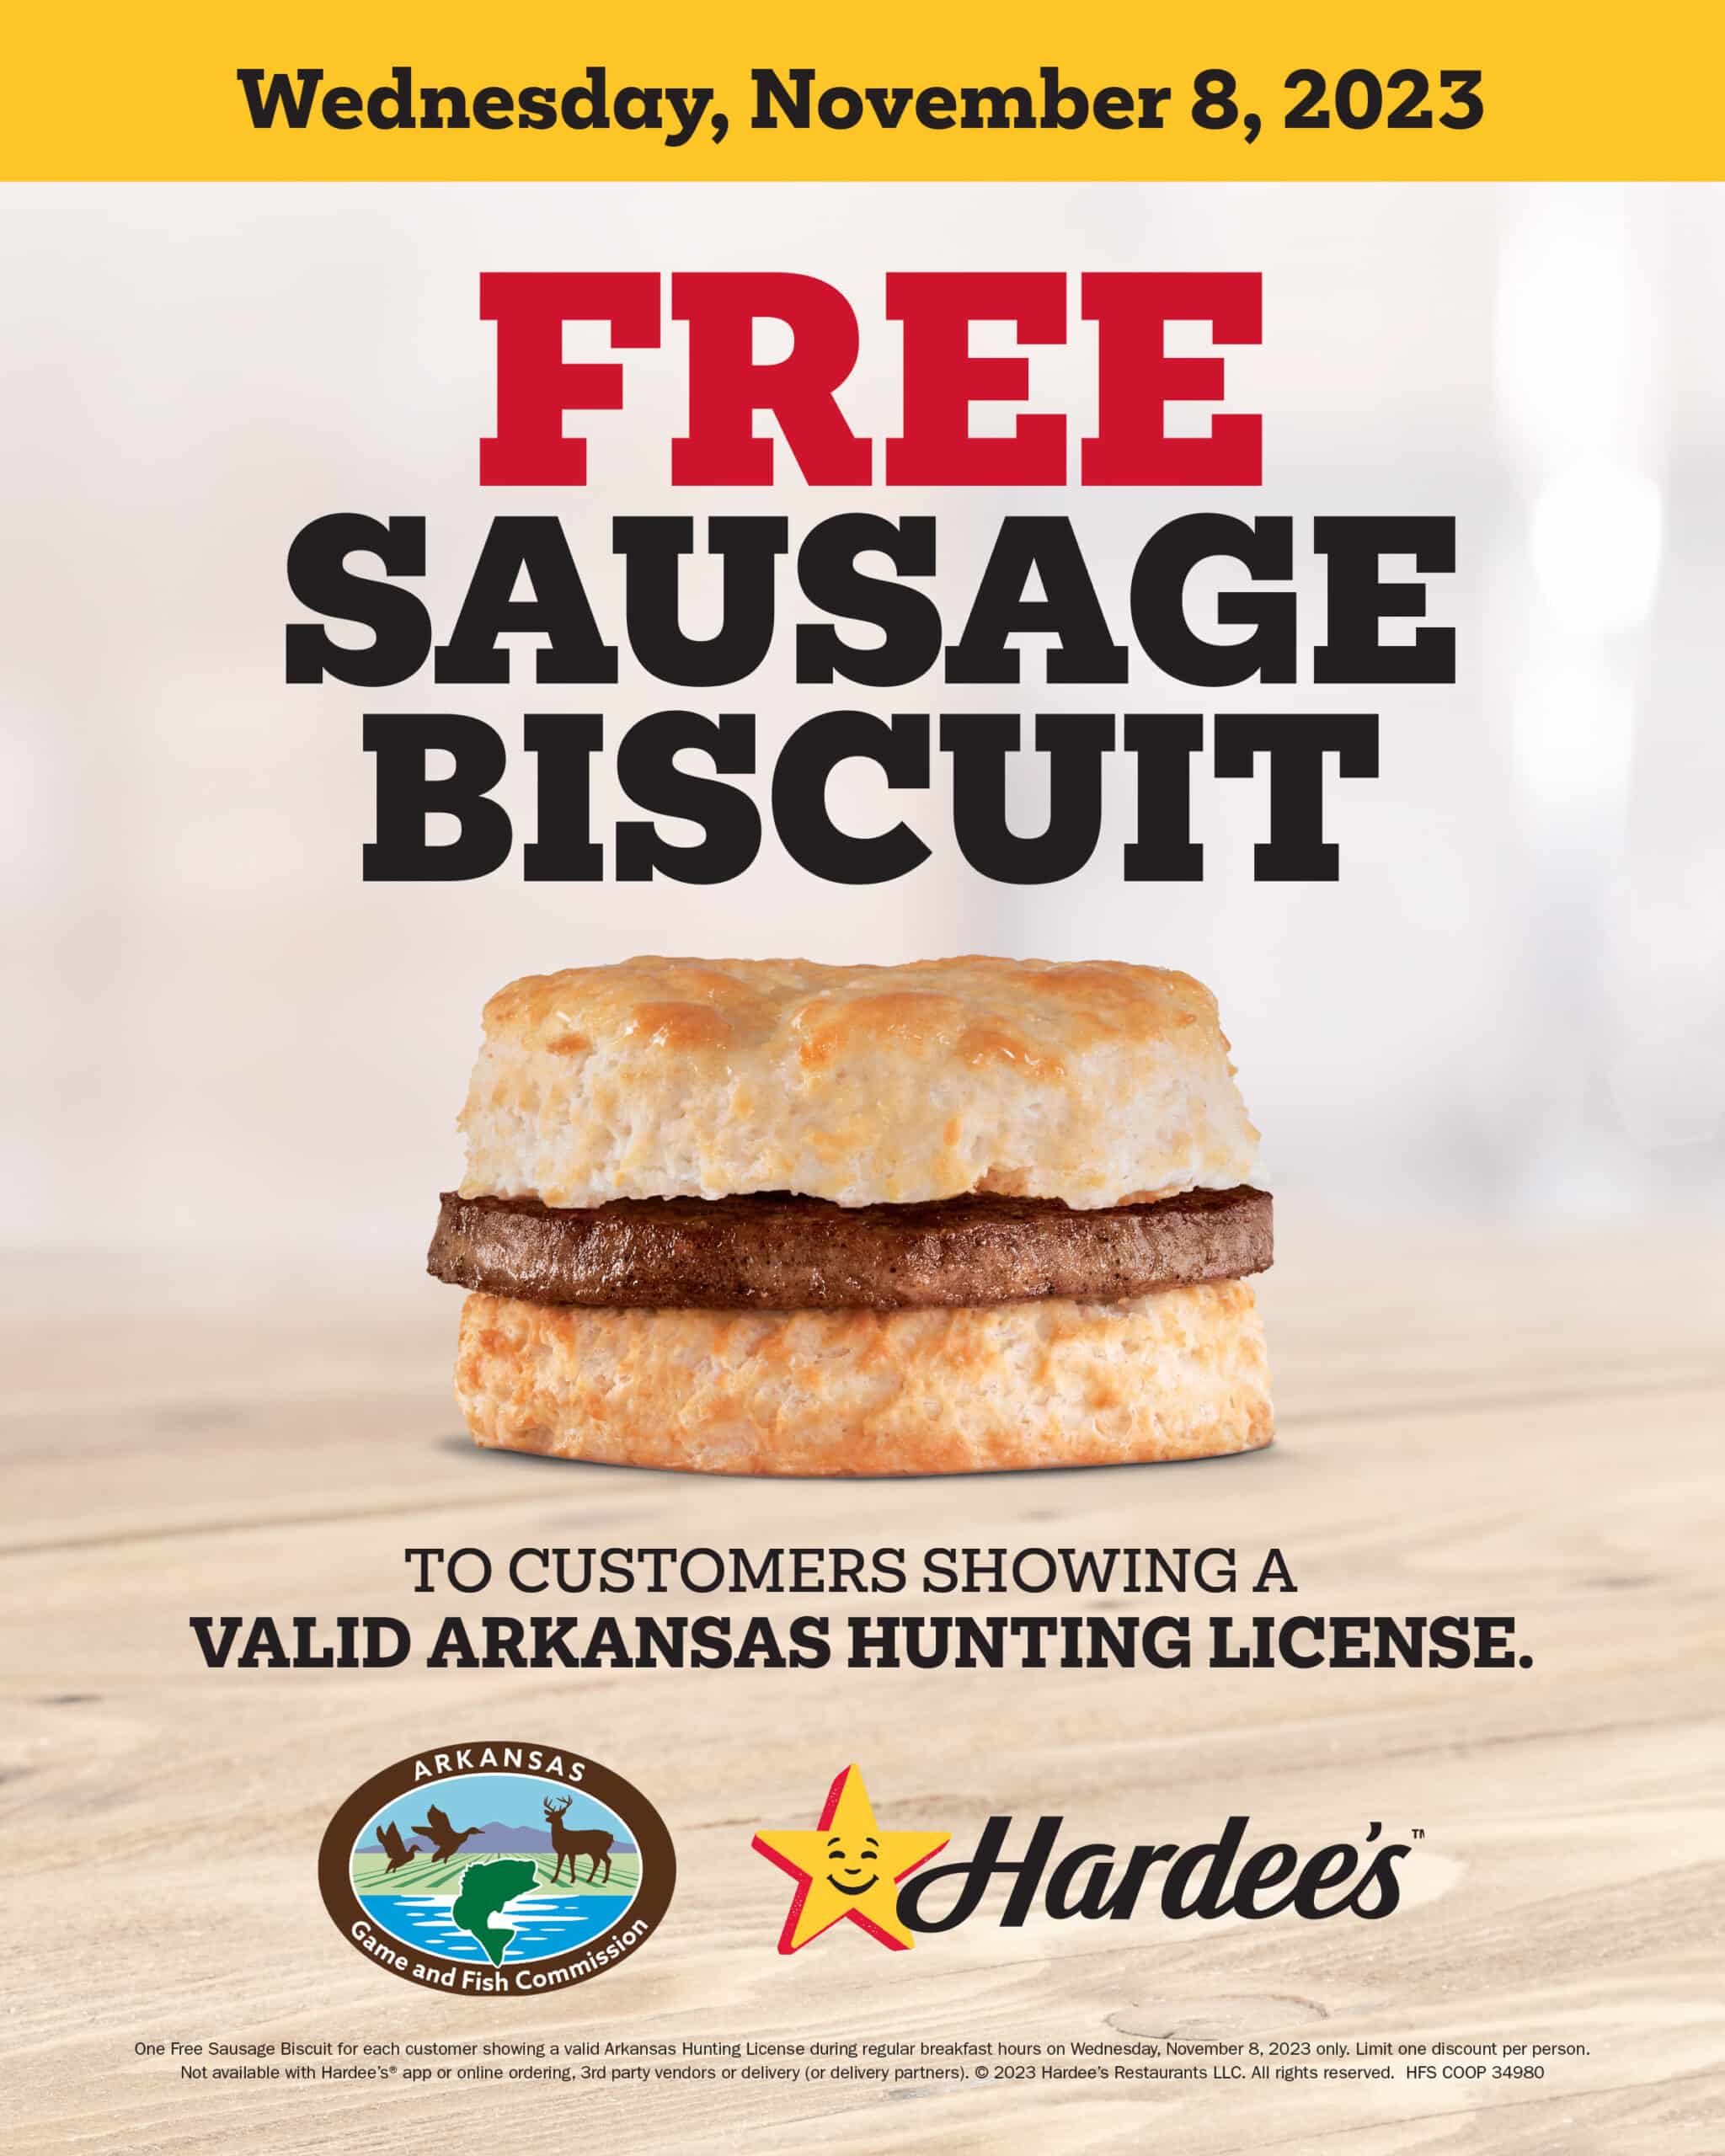 What Time Does Hardee's Stop Serving Breakfast? Don't Miss Out!